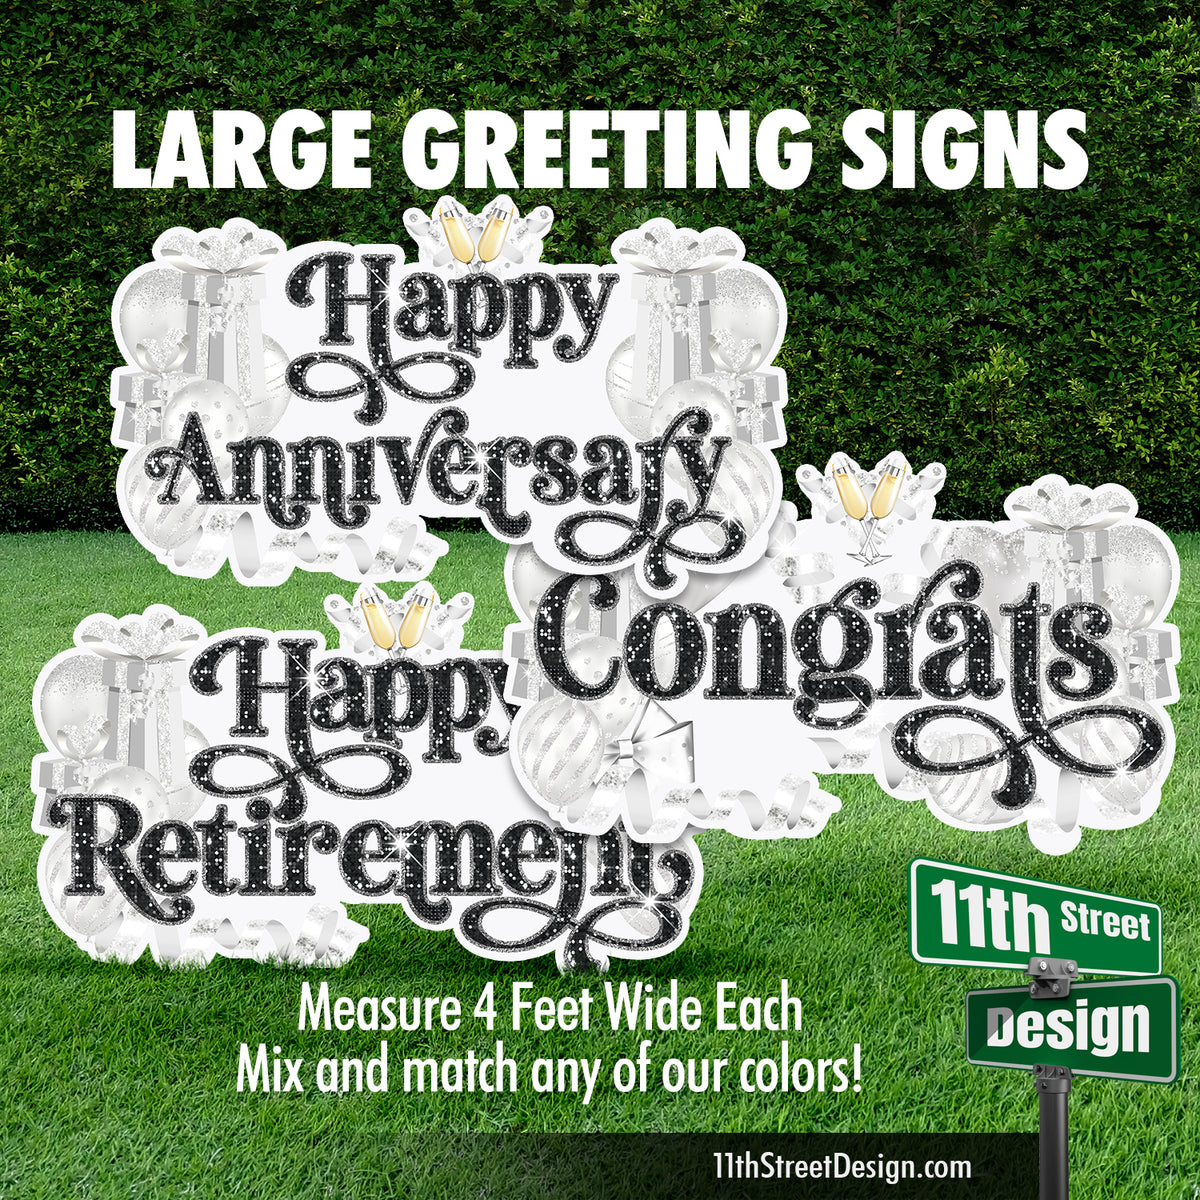 Multi Occasion Large Greeting Signs - Anniversary, Retirement, Congrats - Celebration Flair White